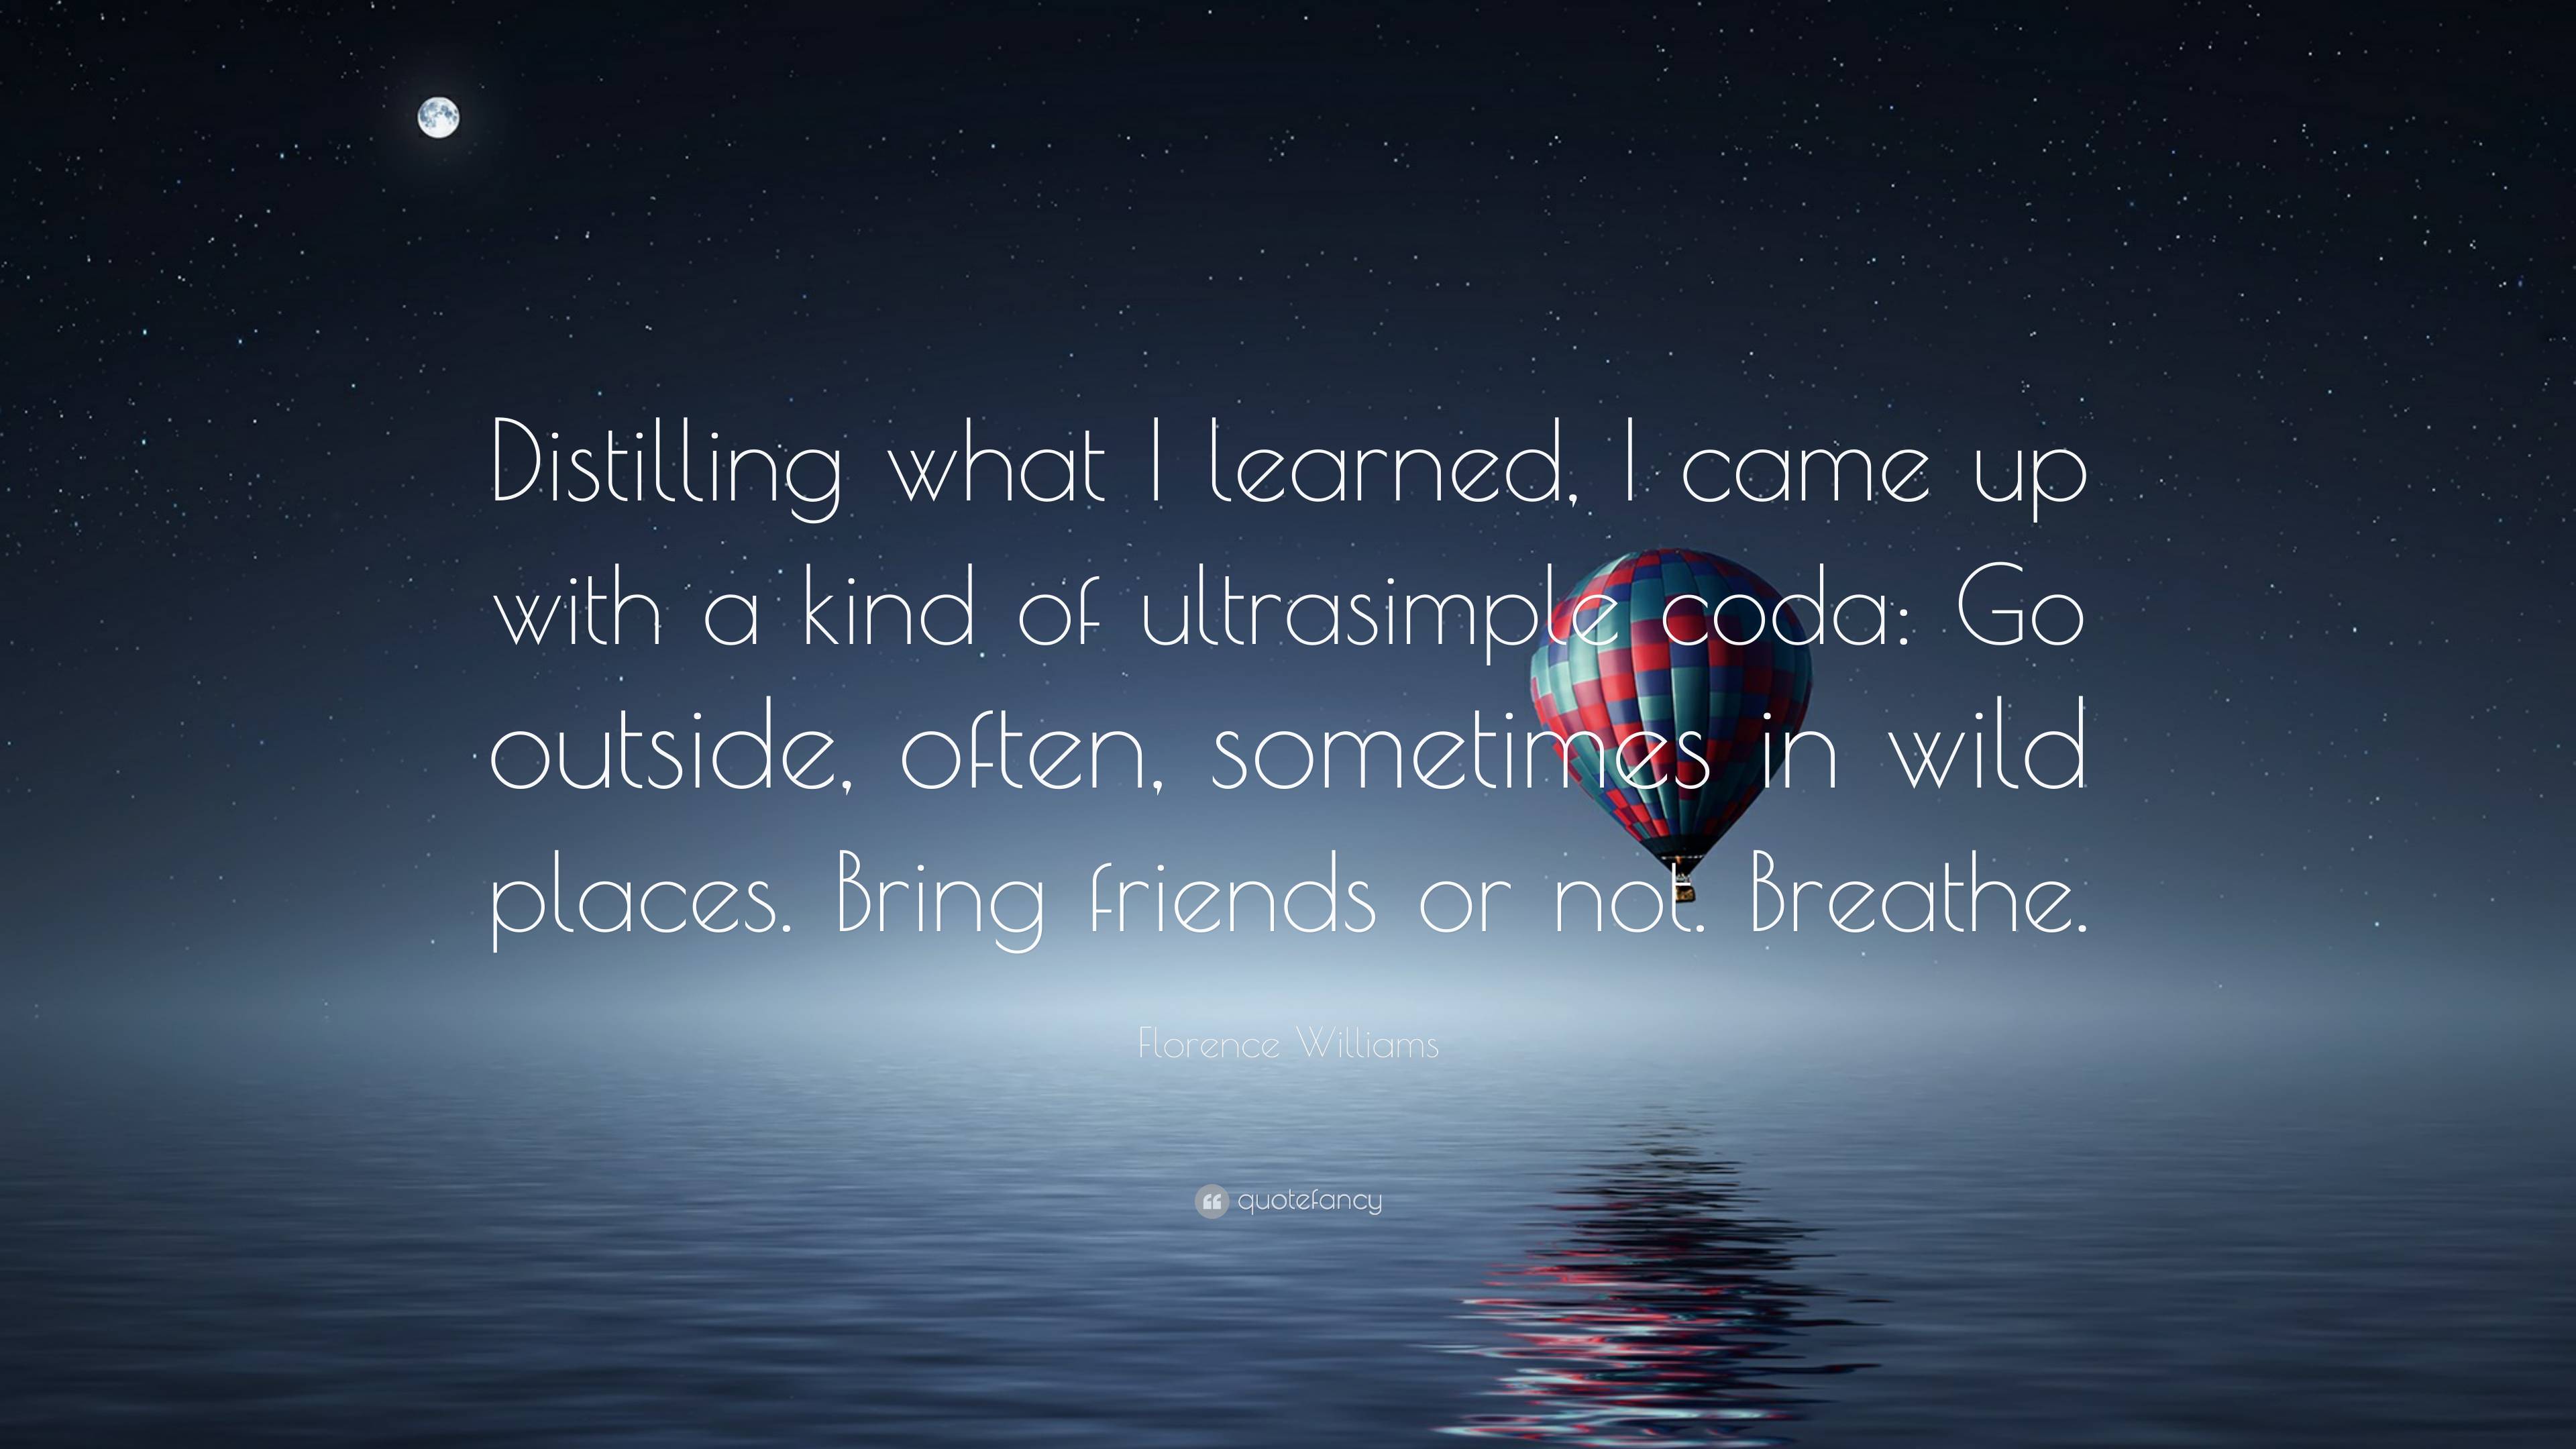 https://quotefancy.com/media/wallpaper/3840x2160/7226840-Florence-Williams-Quote-Distilling-what-I-learned-I-came-up-with-a.jpg